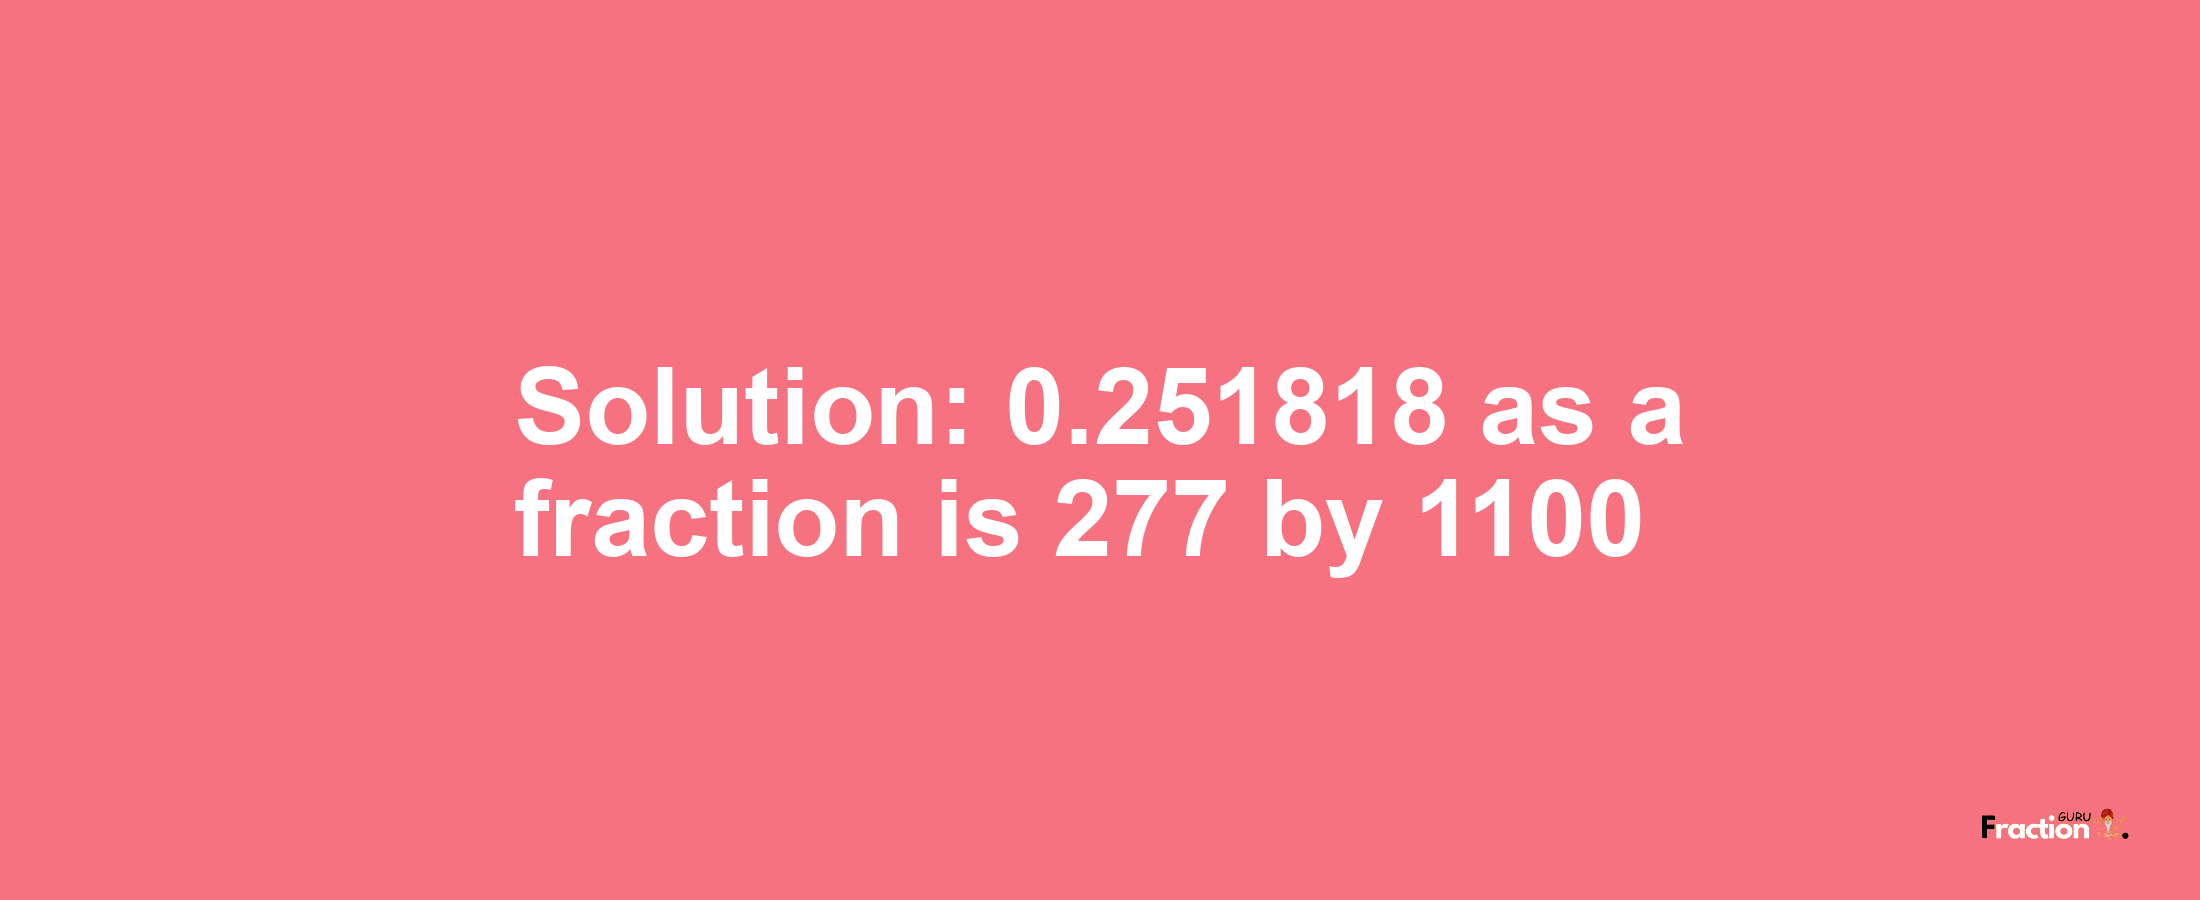 Solution:0.251818 as a fraction is 277/1100